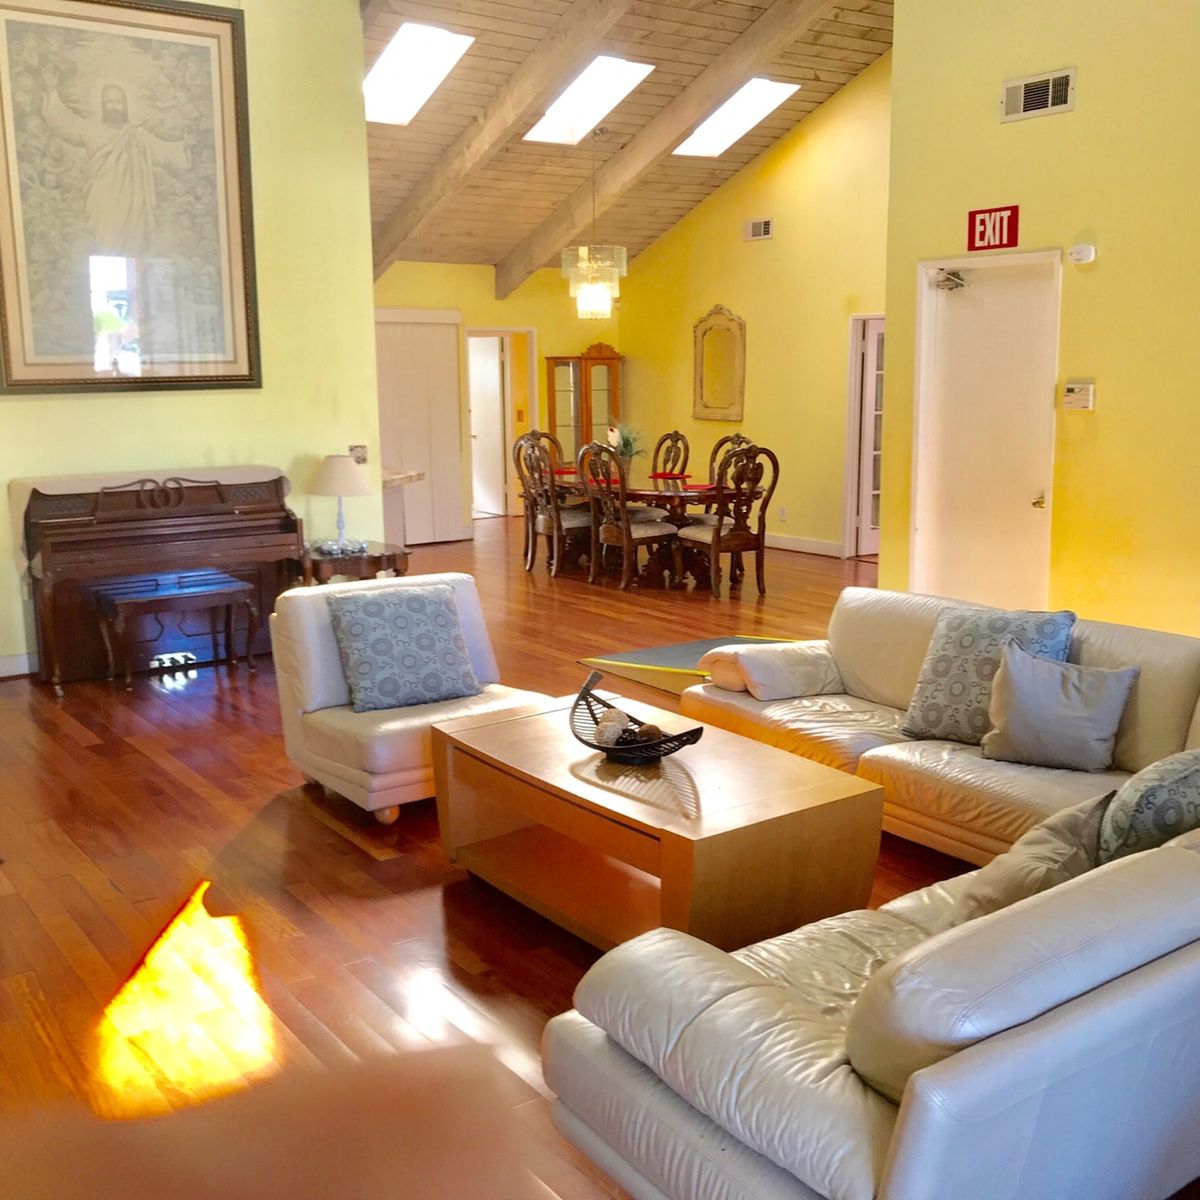 Elderly person in a cozy, well-furnished senior living room with piano, fireplace and dining area.